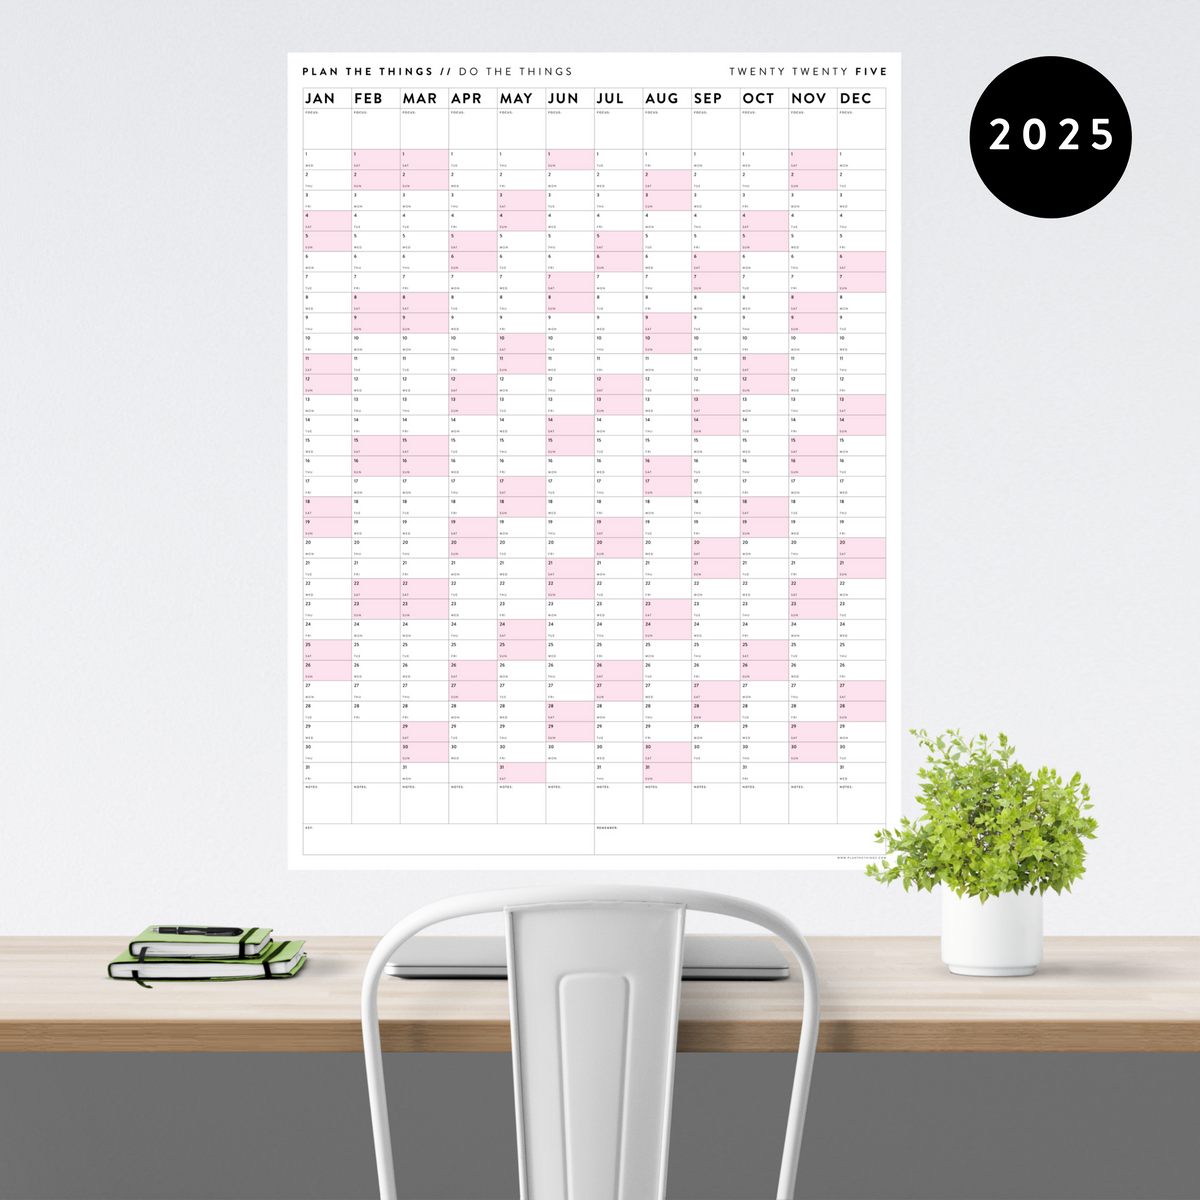 GIANT 2025 ANNUAL WALL CALENDAR VERTICAL WITH PINK WEEKENDS Plan